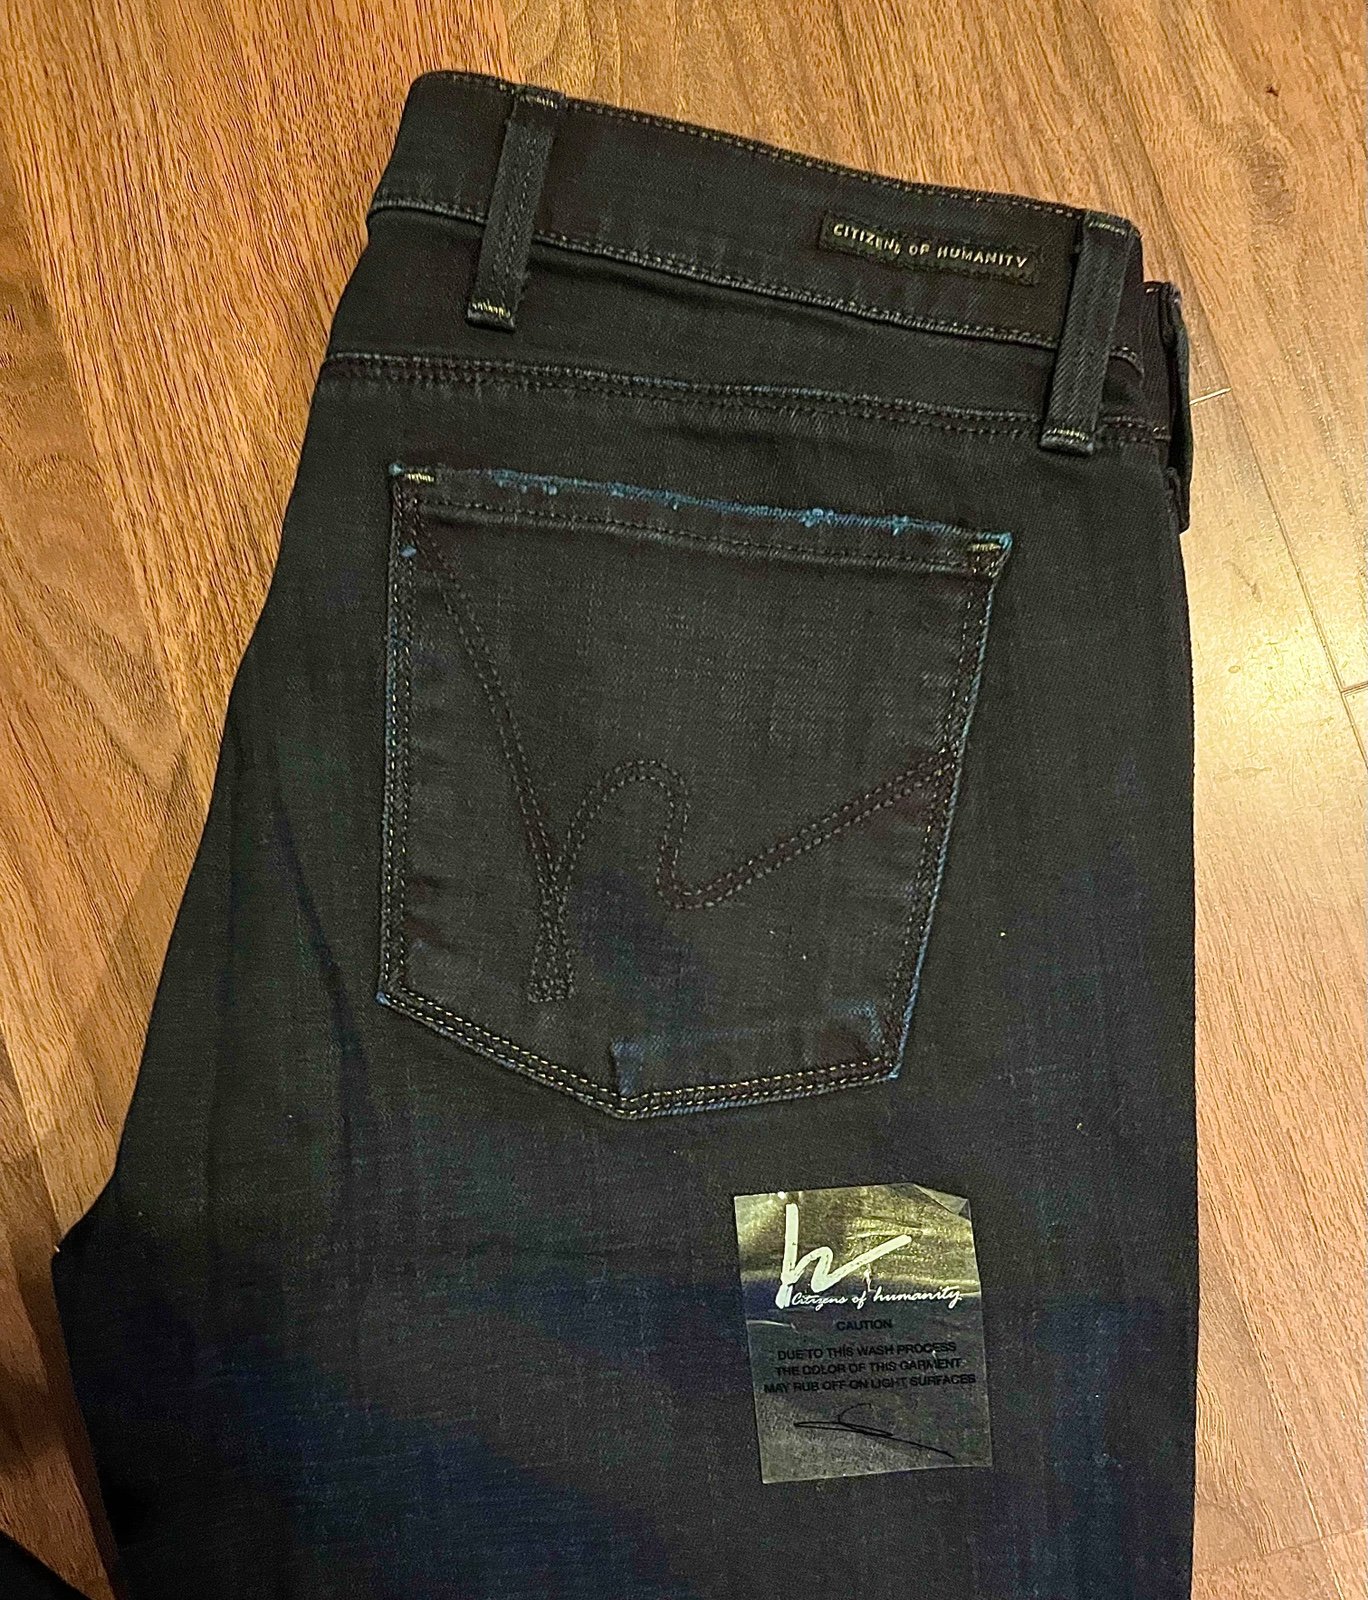 Exclusive Citizens Of Humanity Jeans KyOHxLz0I hot sale